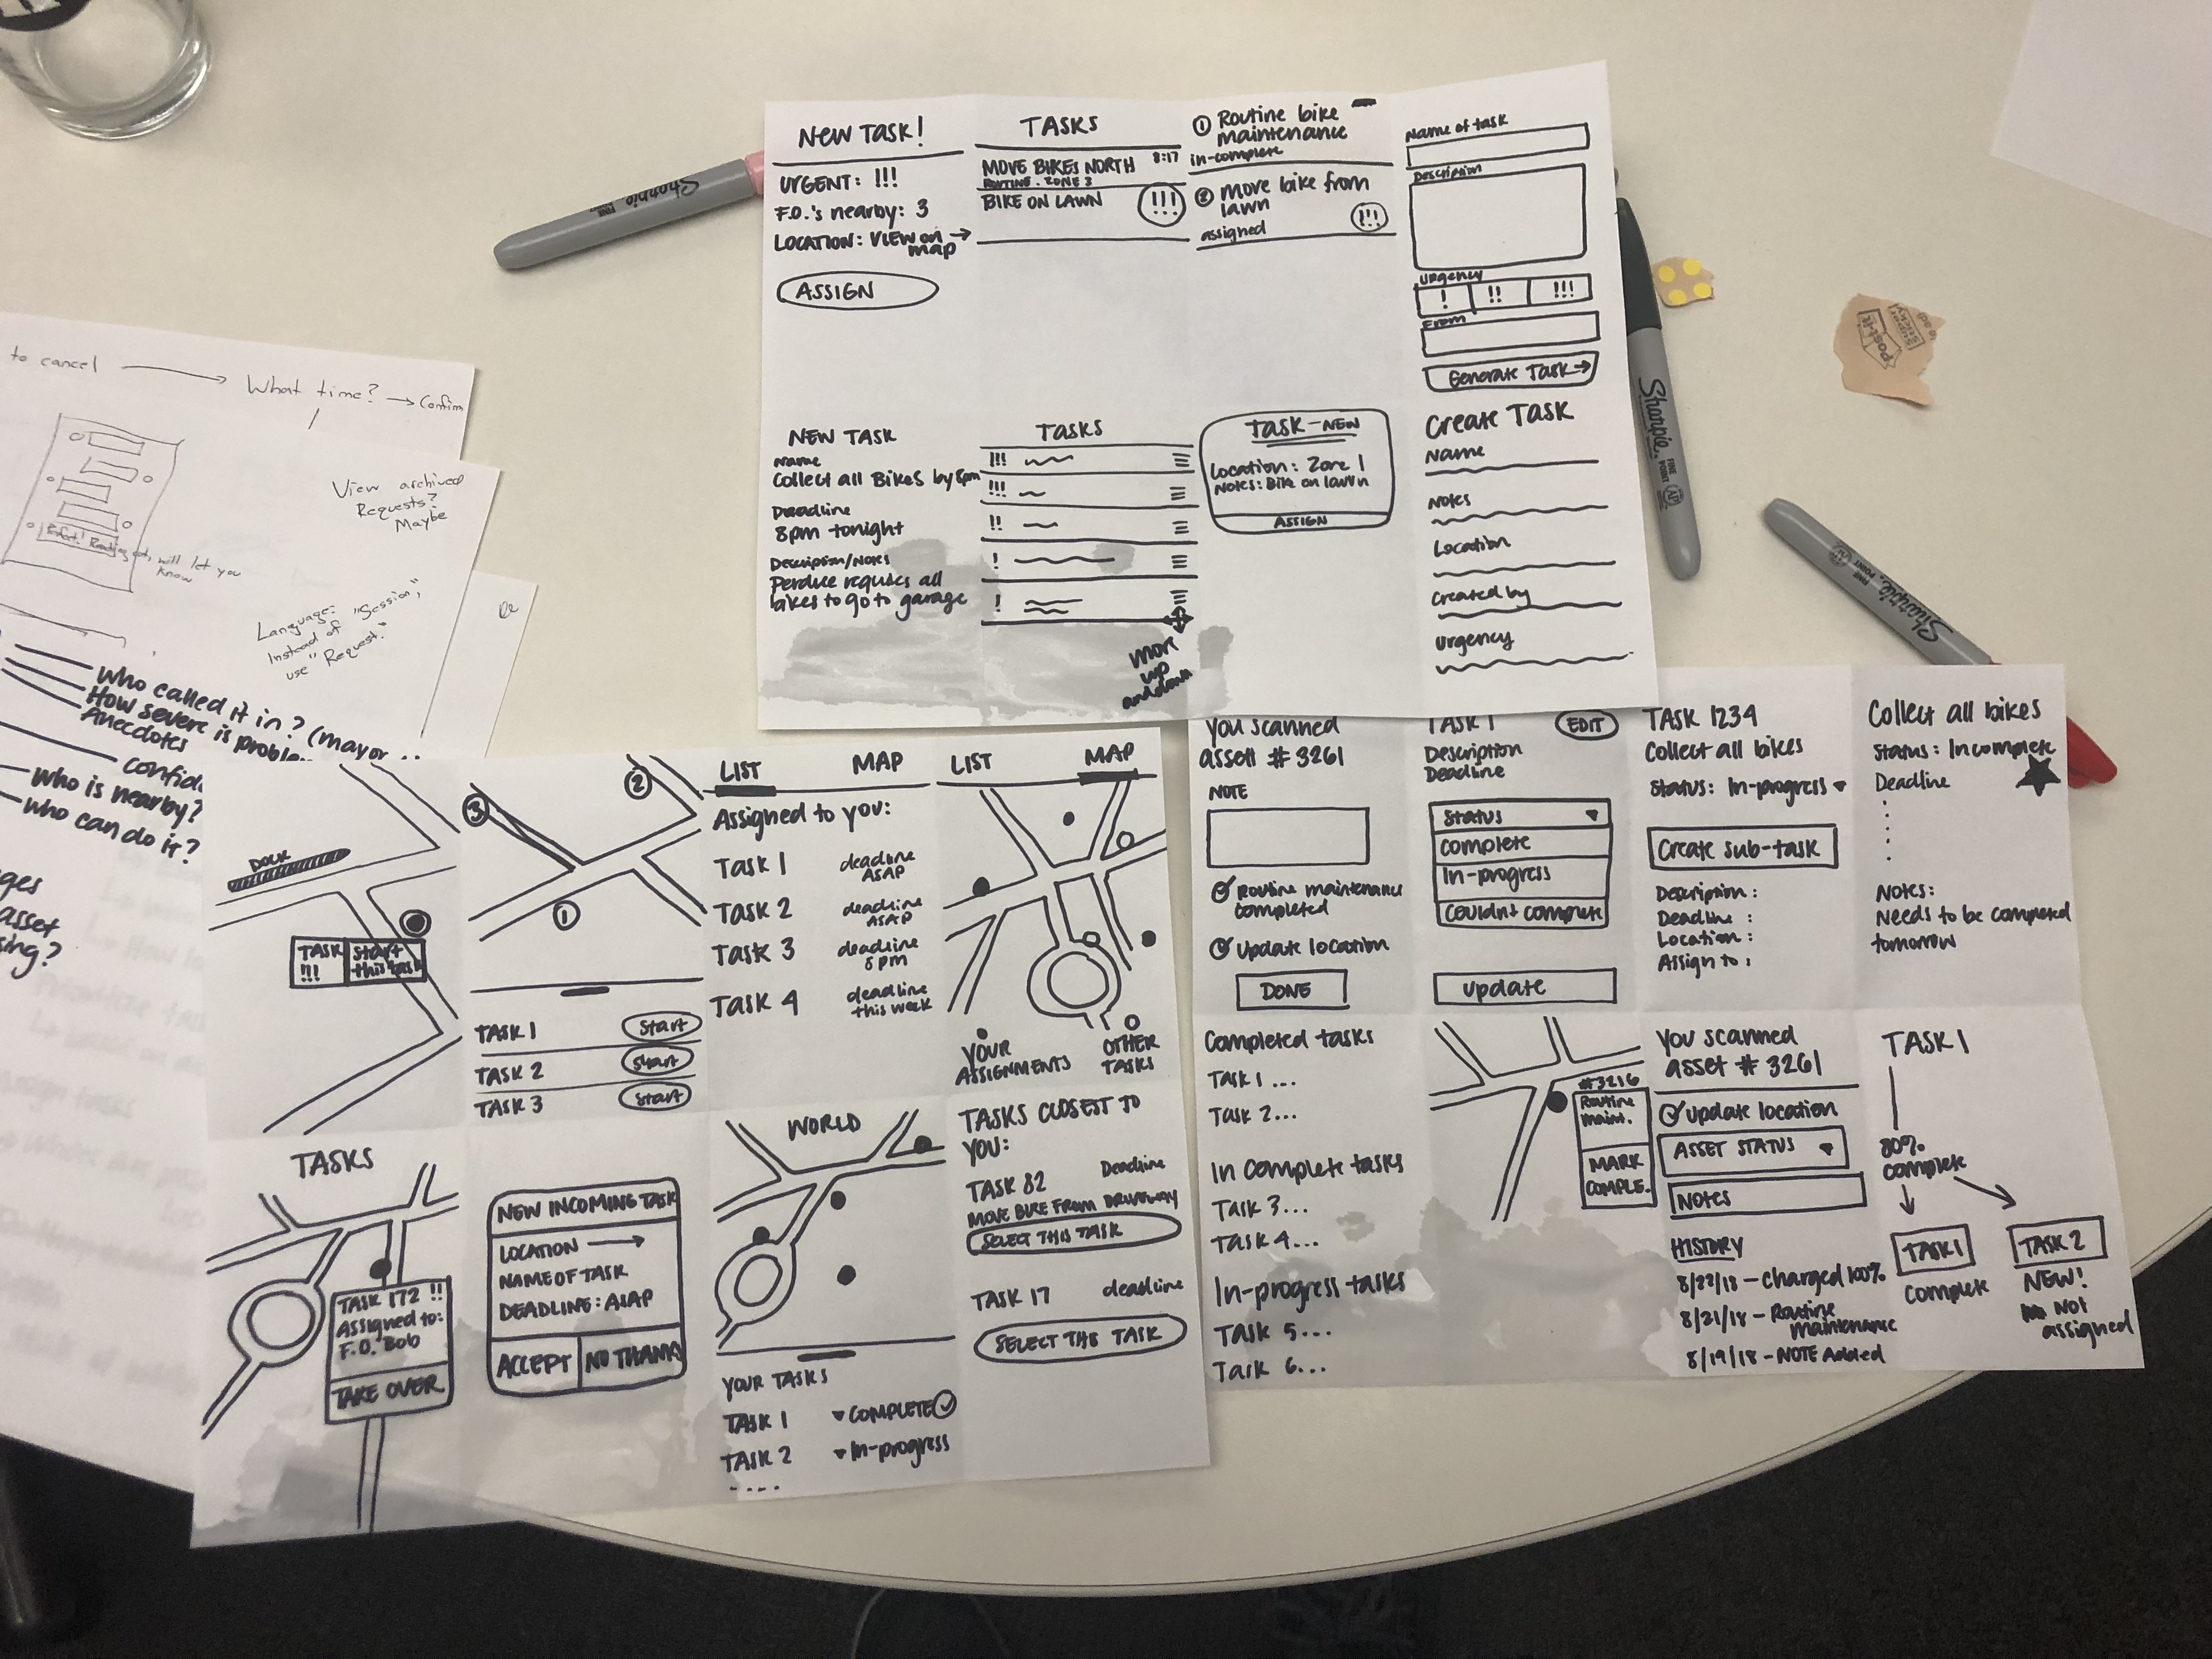 Sheets of paper with marker drawings of map UI